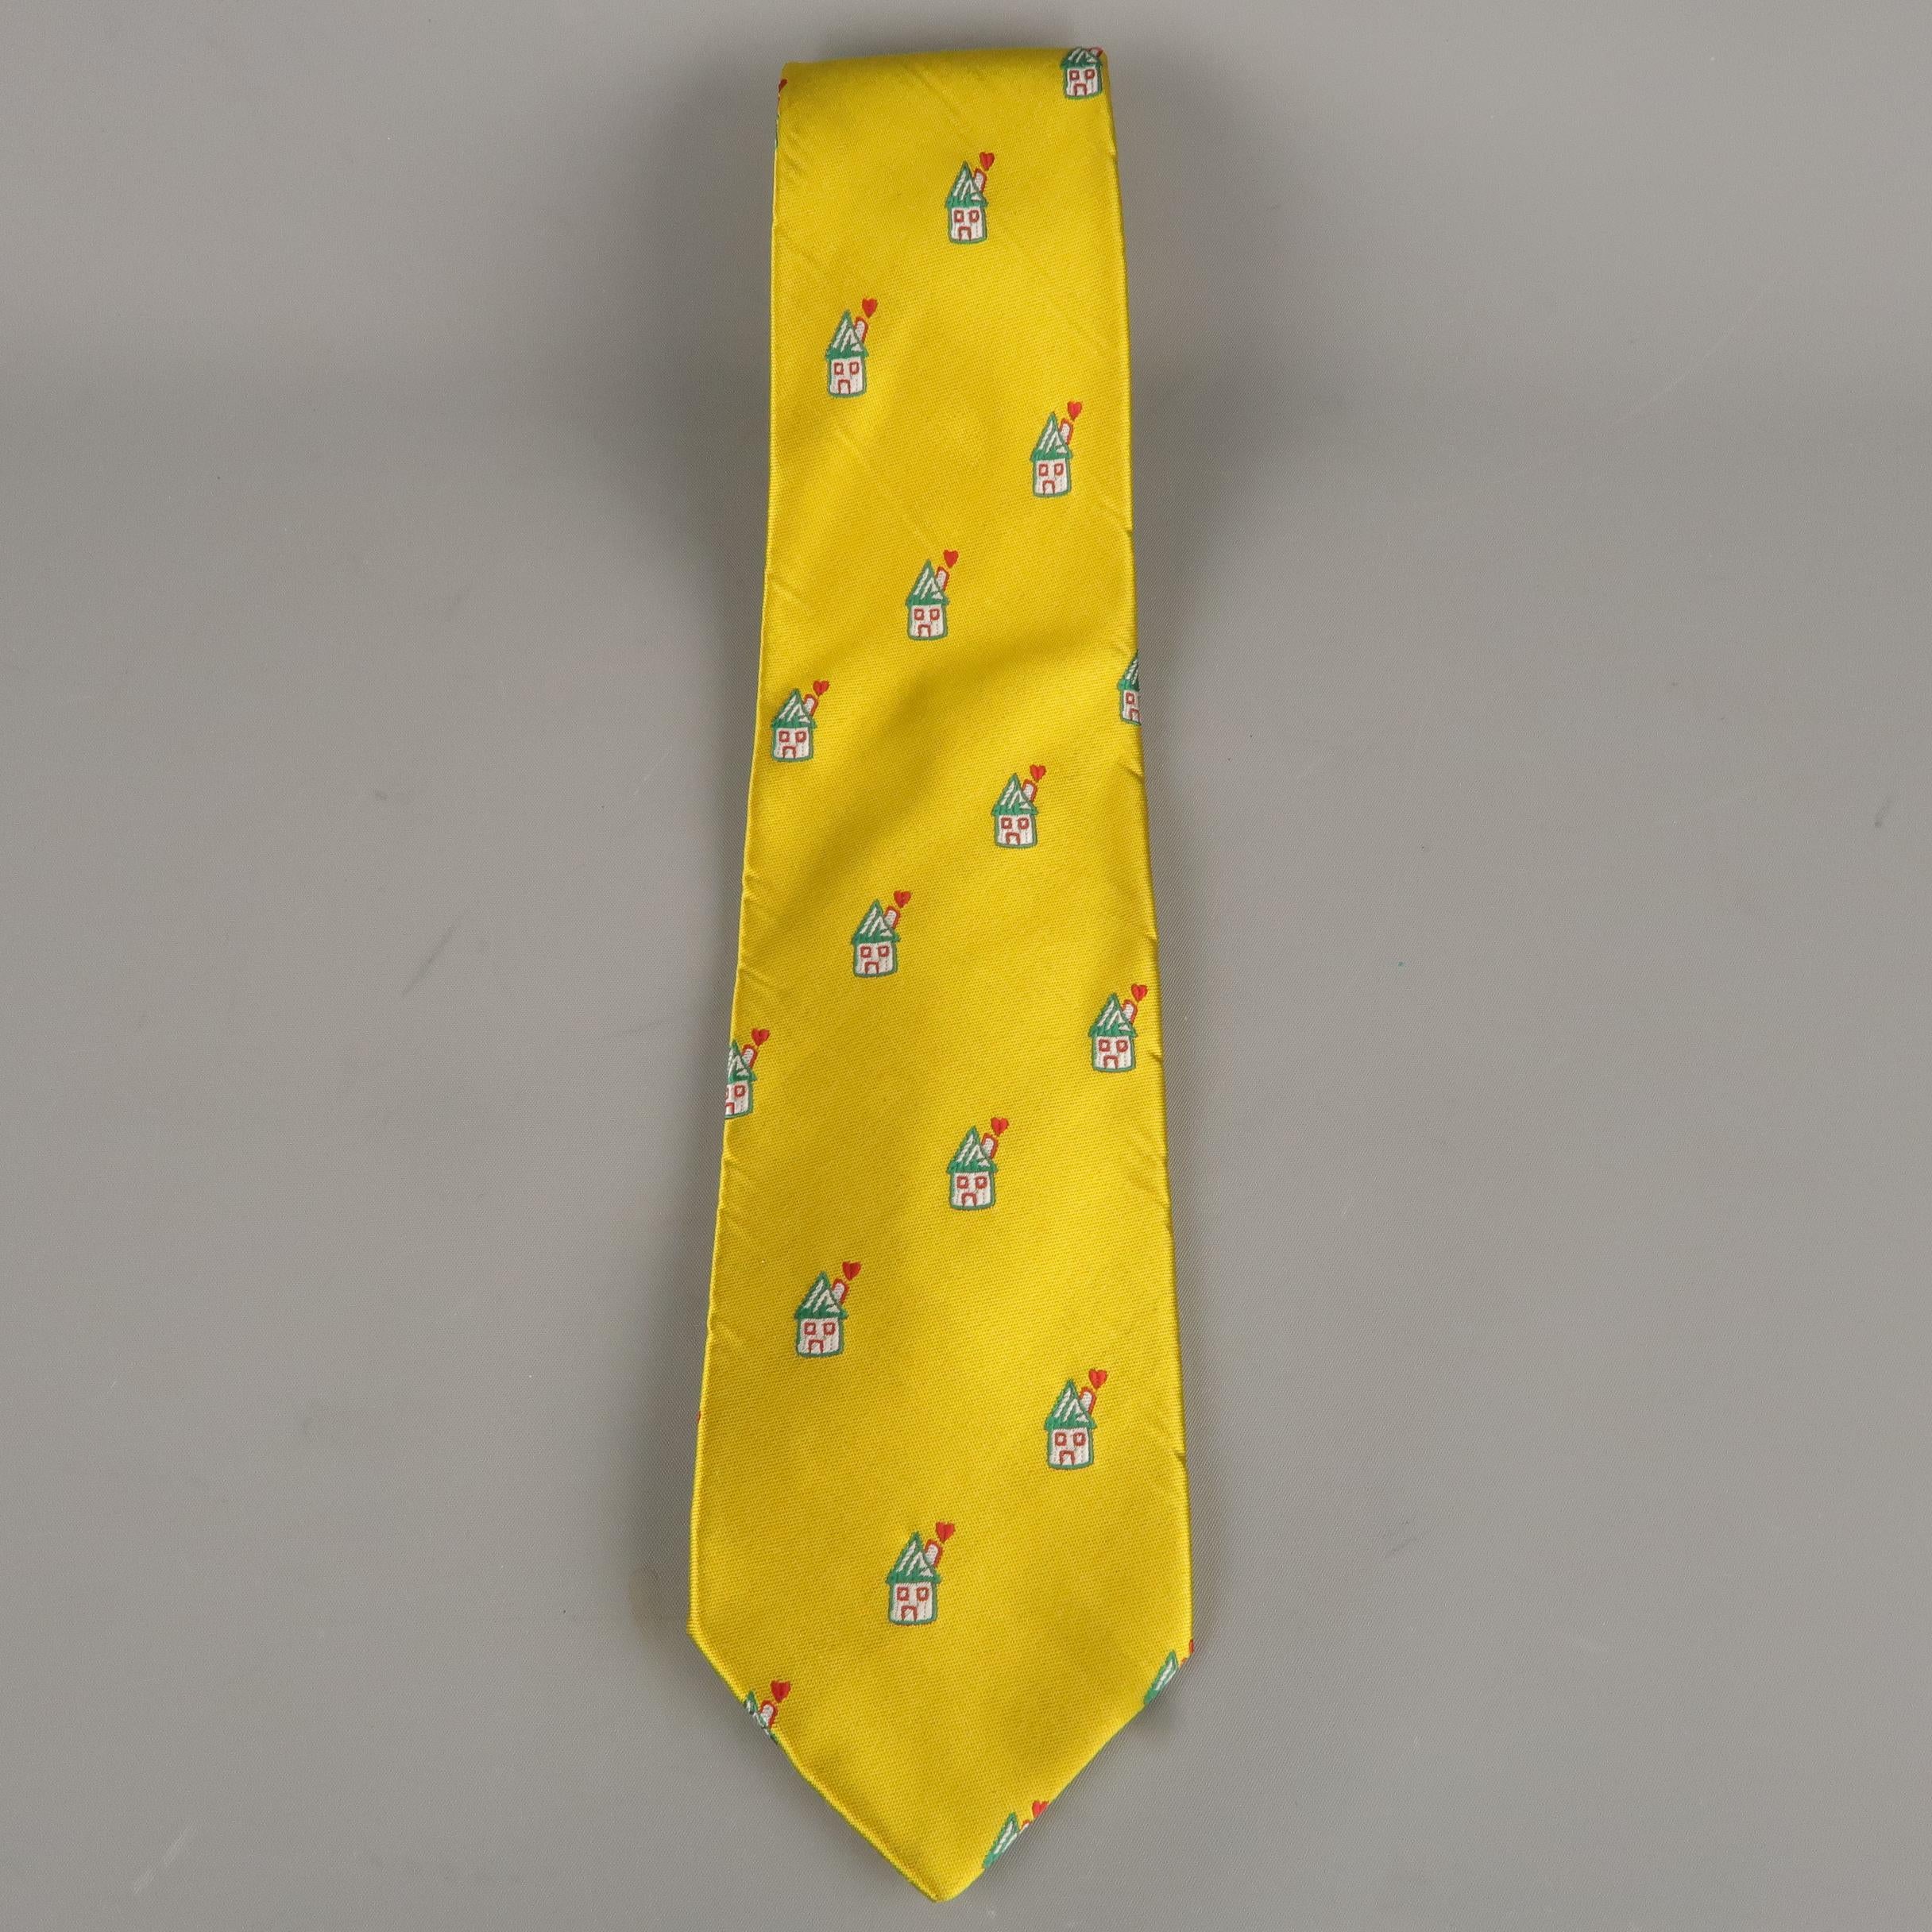 Vintage MOSCHINO tie comes in yellow gold silk satin with an all over green and red heart house print. Made in Italy.
 
Very Good Pre-Owned Condition.
 
Width: 3.60 in.